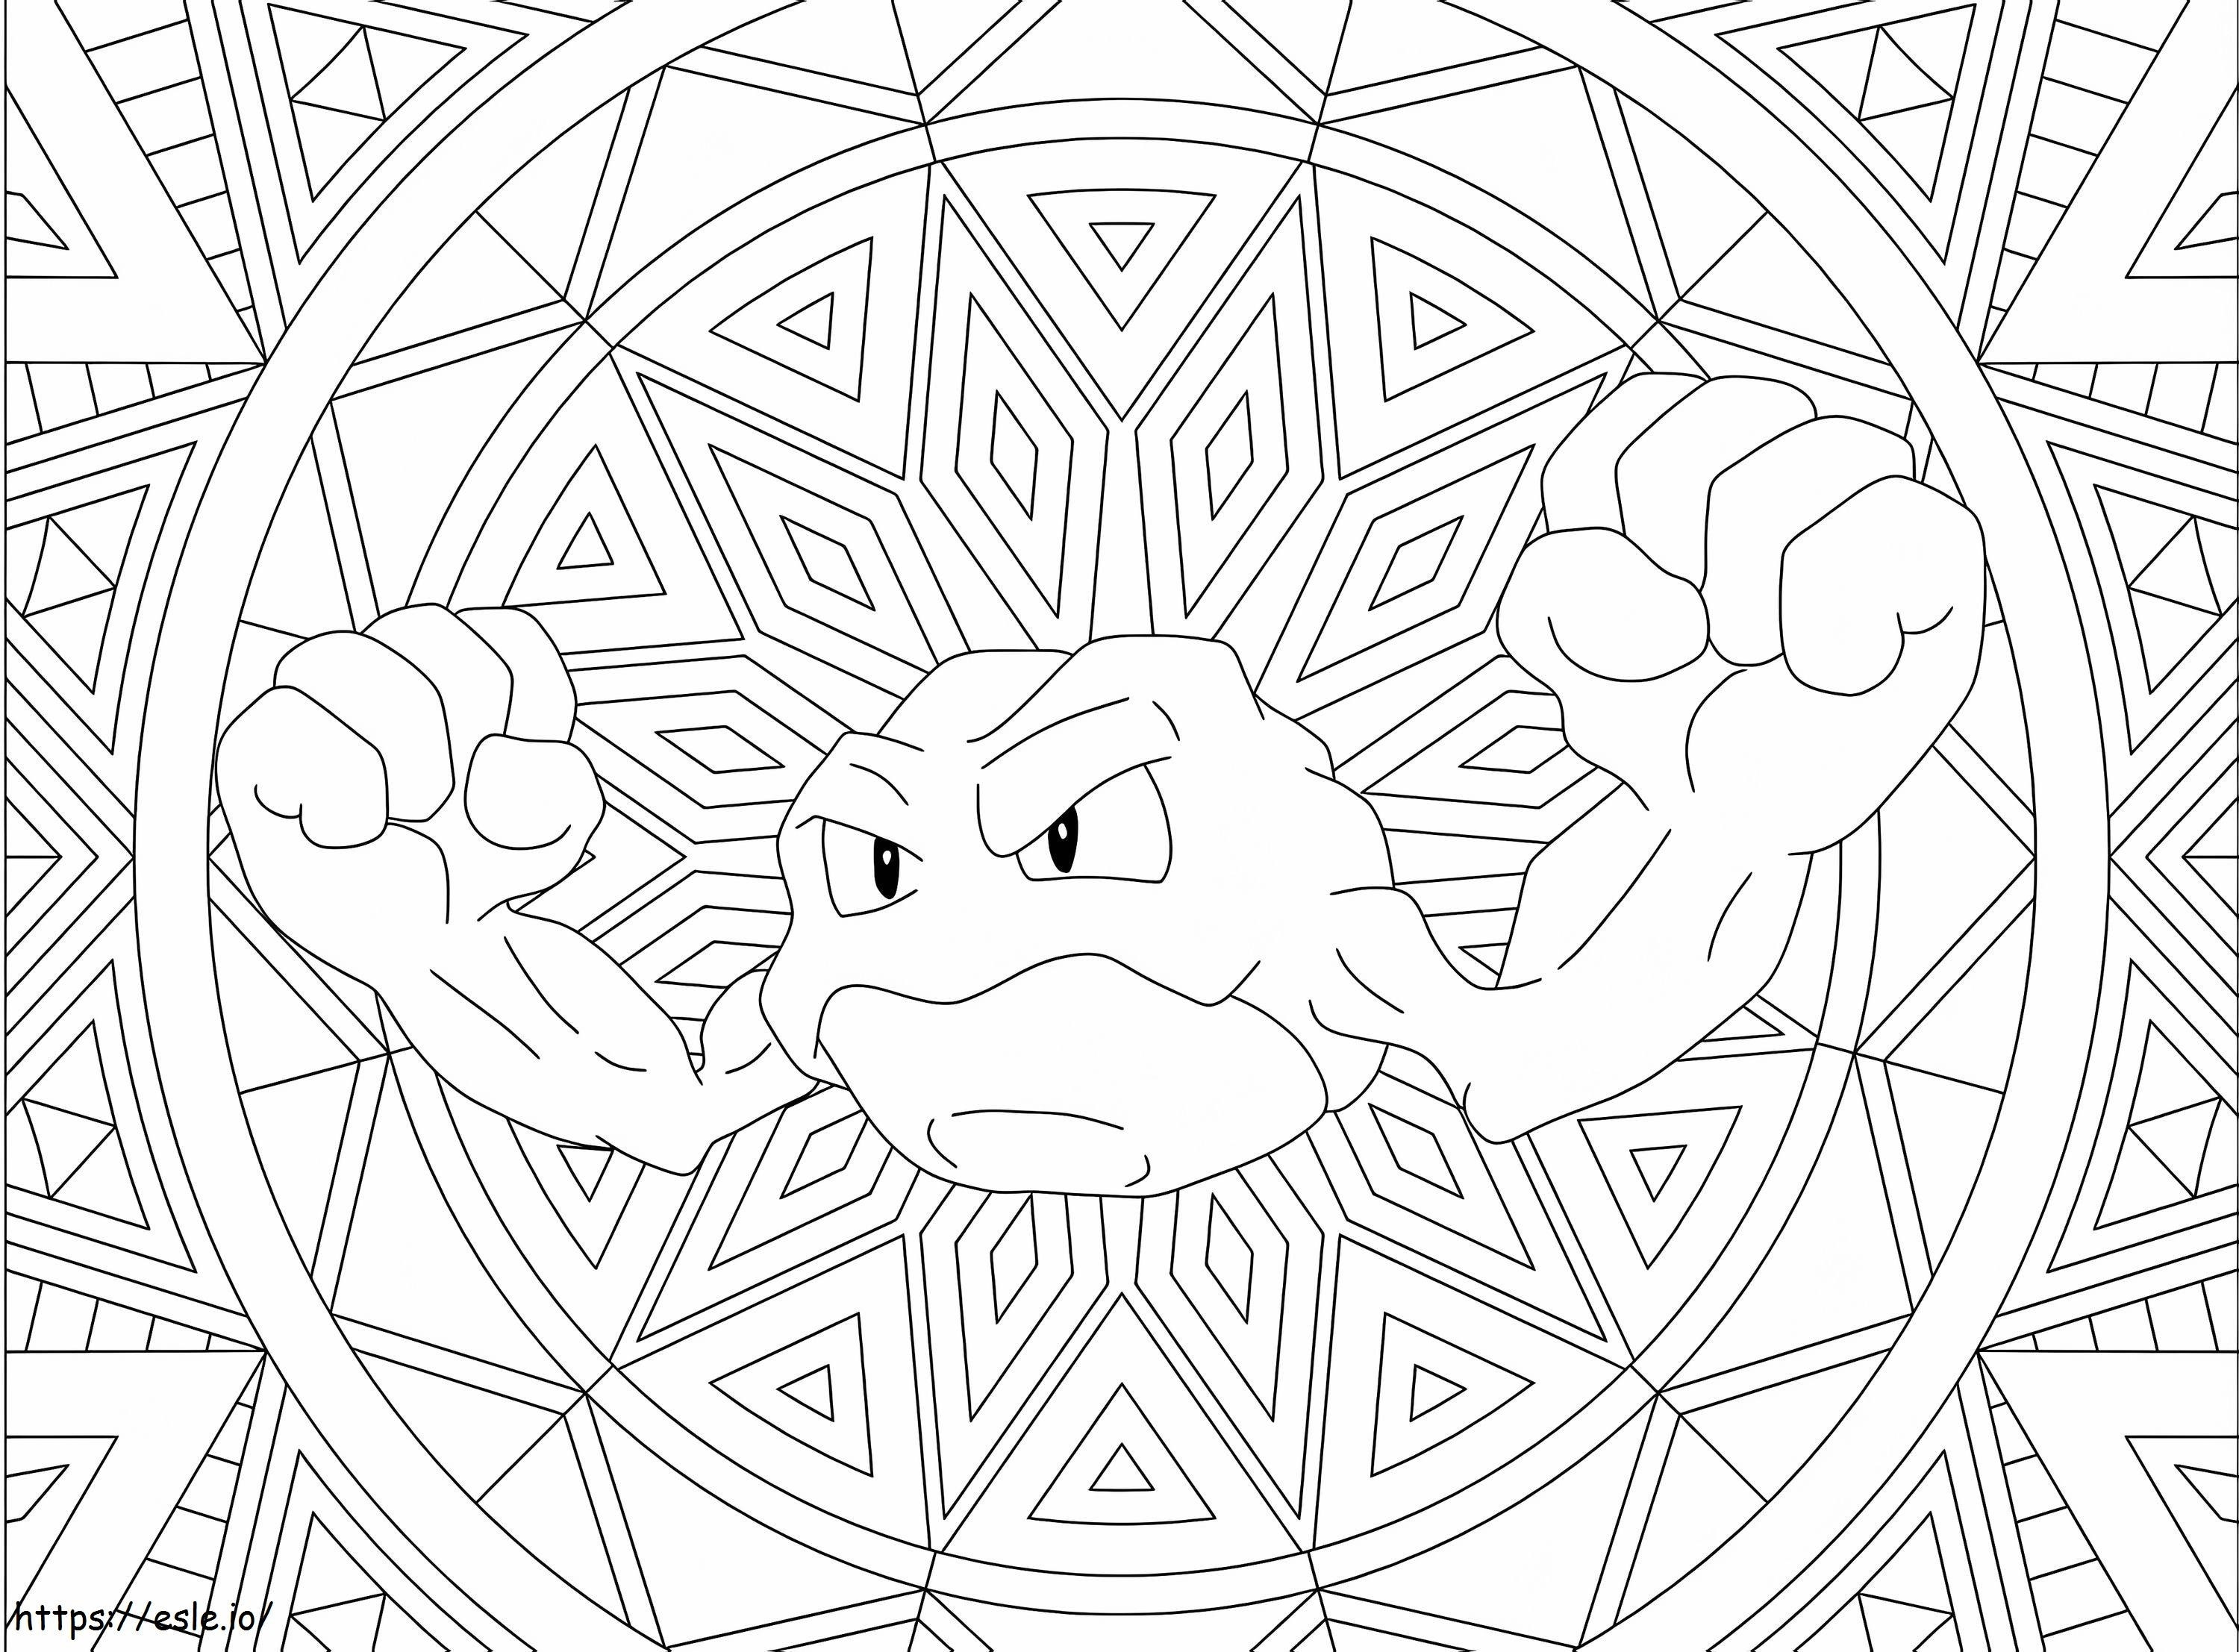 Geodude 5 coloring page